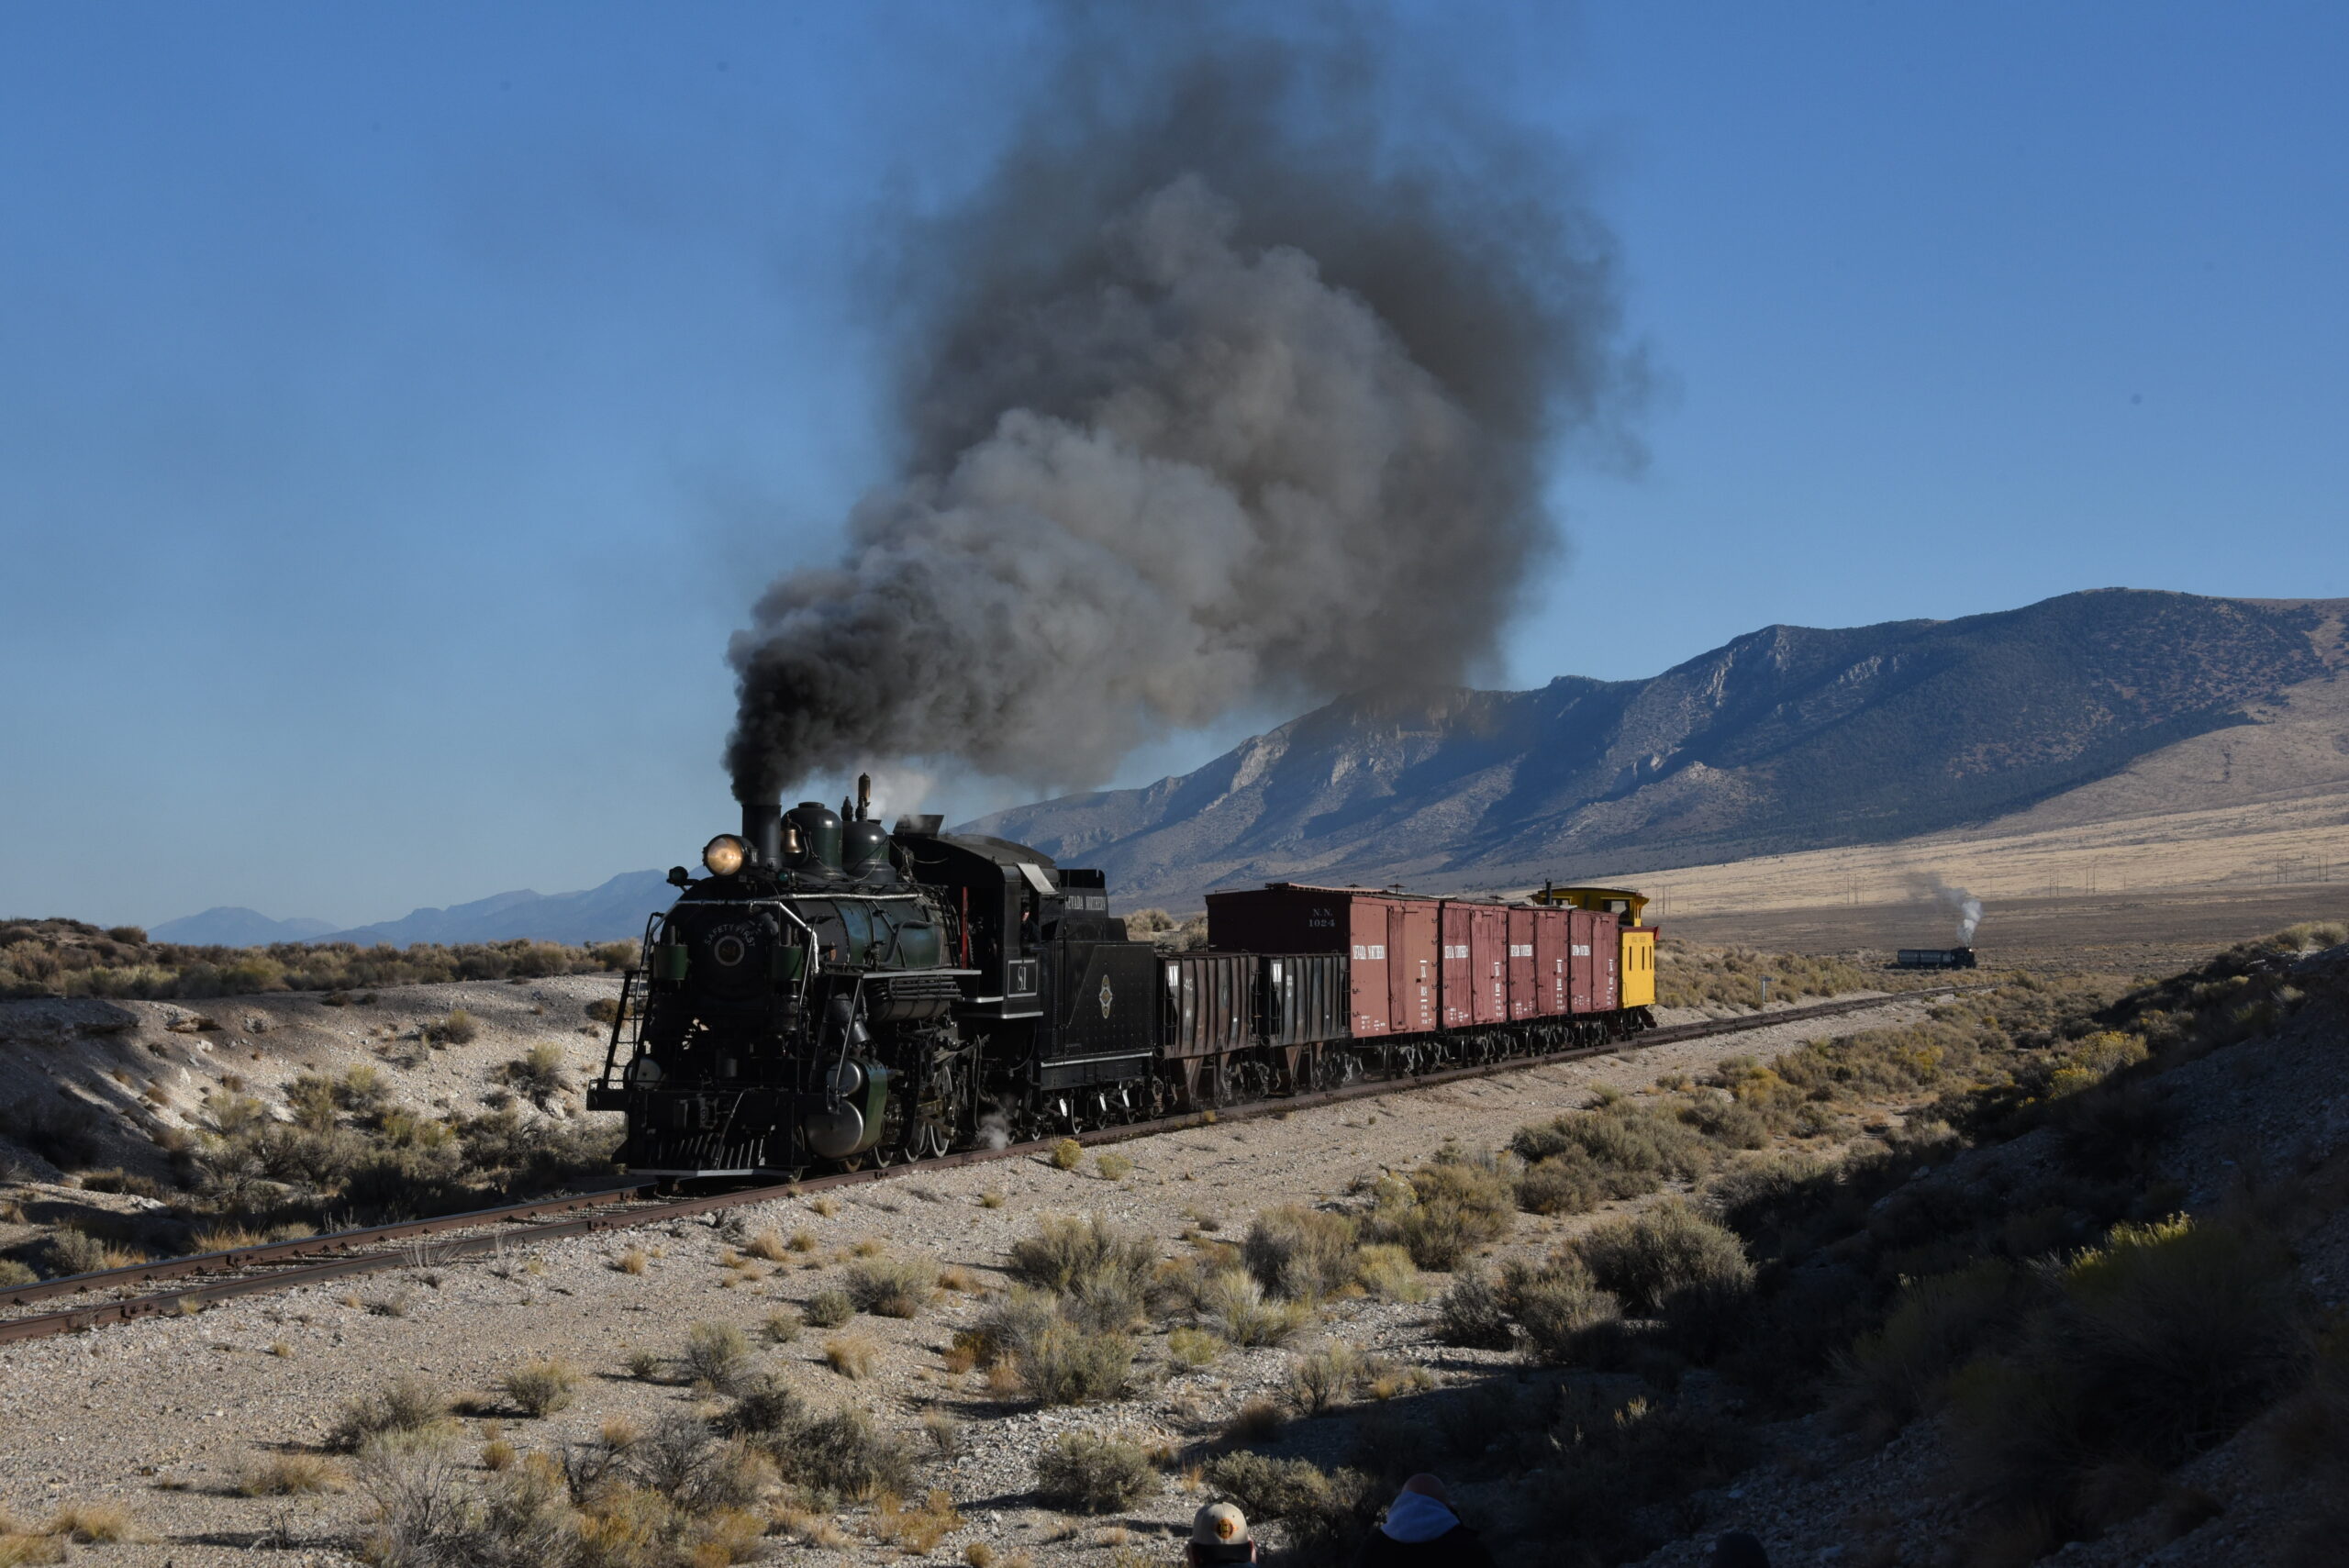 Steam locomotive at speed with freight train while another train waits in the distance.